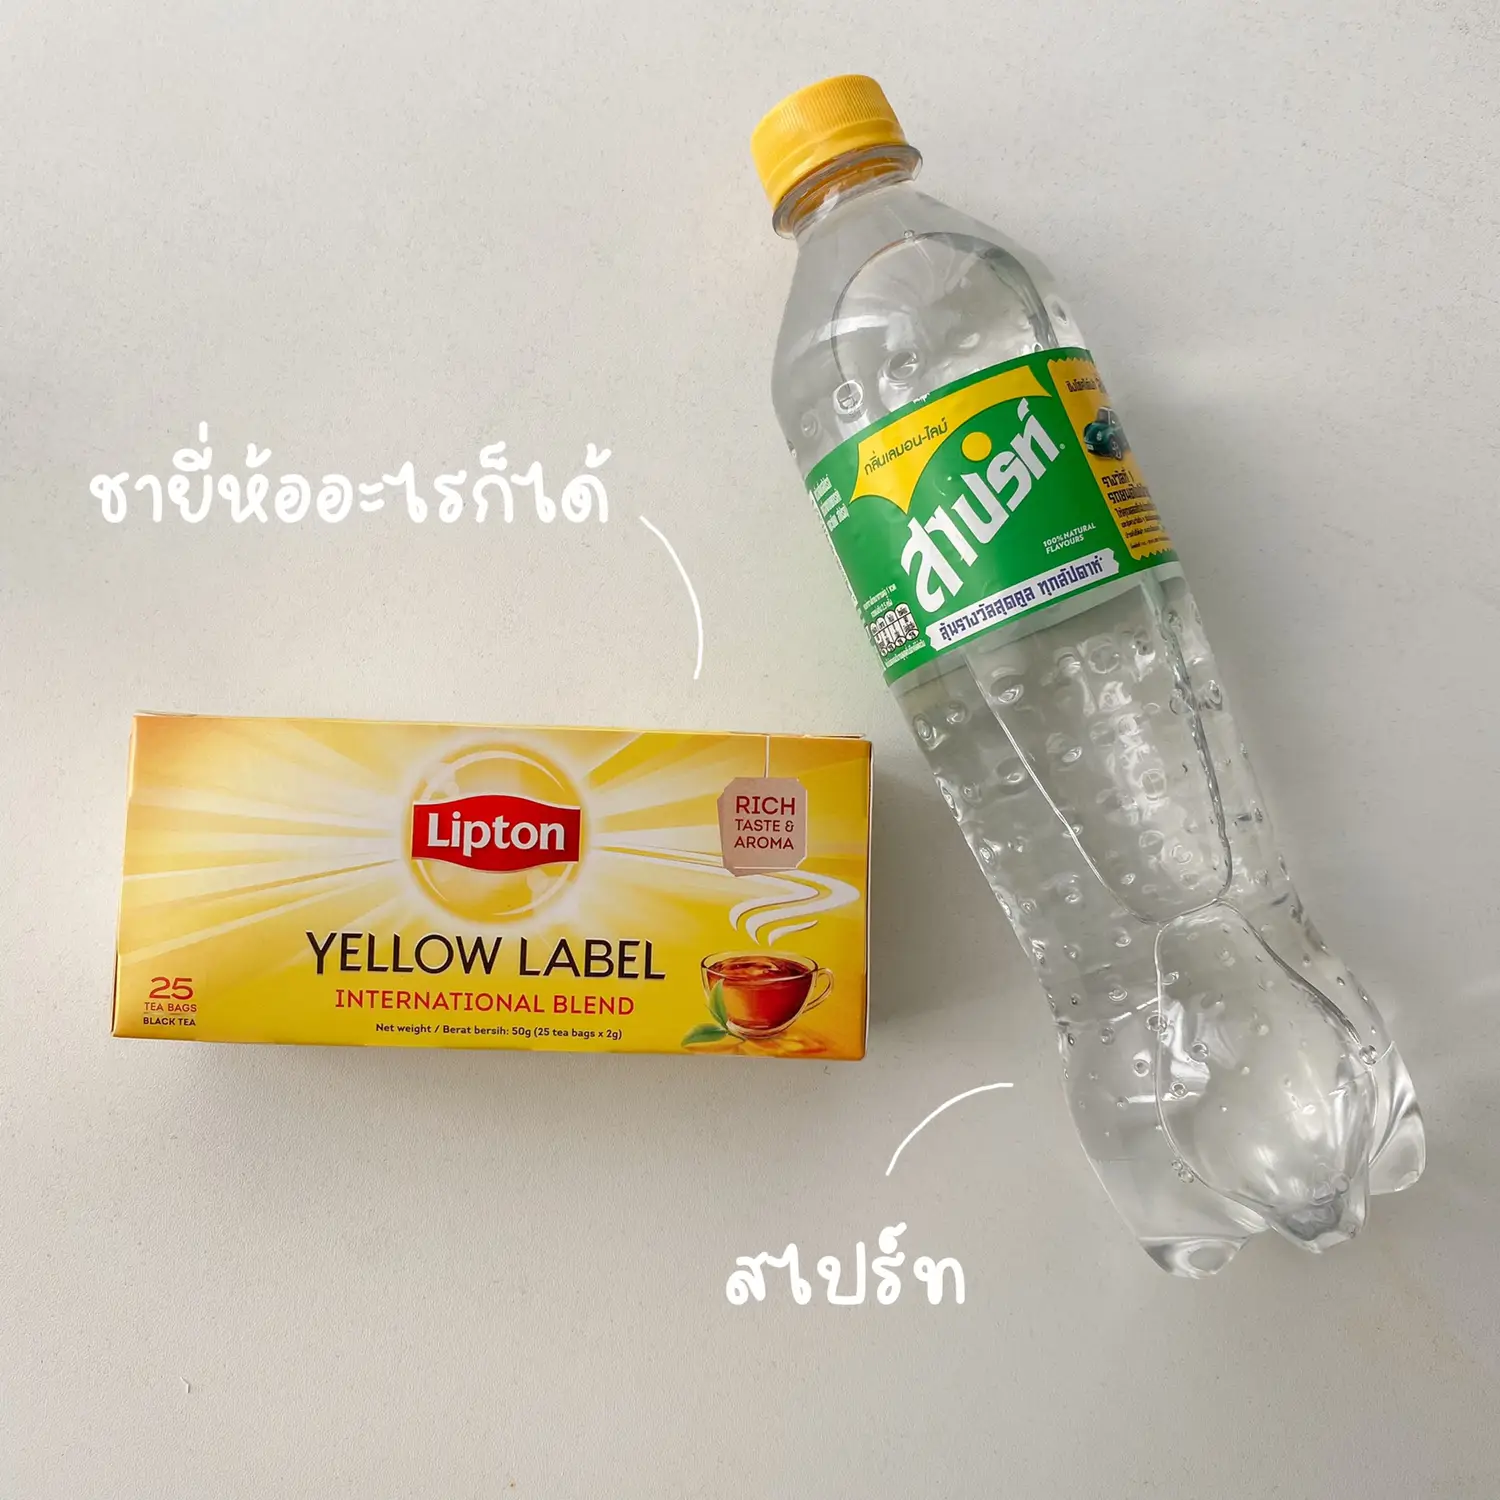 How to Make 'Sprite Iced Tea' with Just Sprite and 2 Lipton Tea Bags